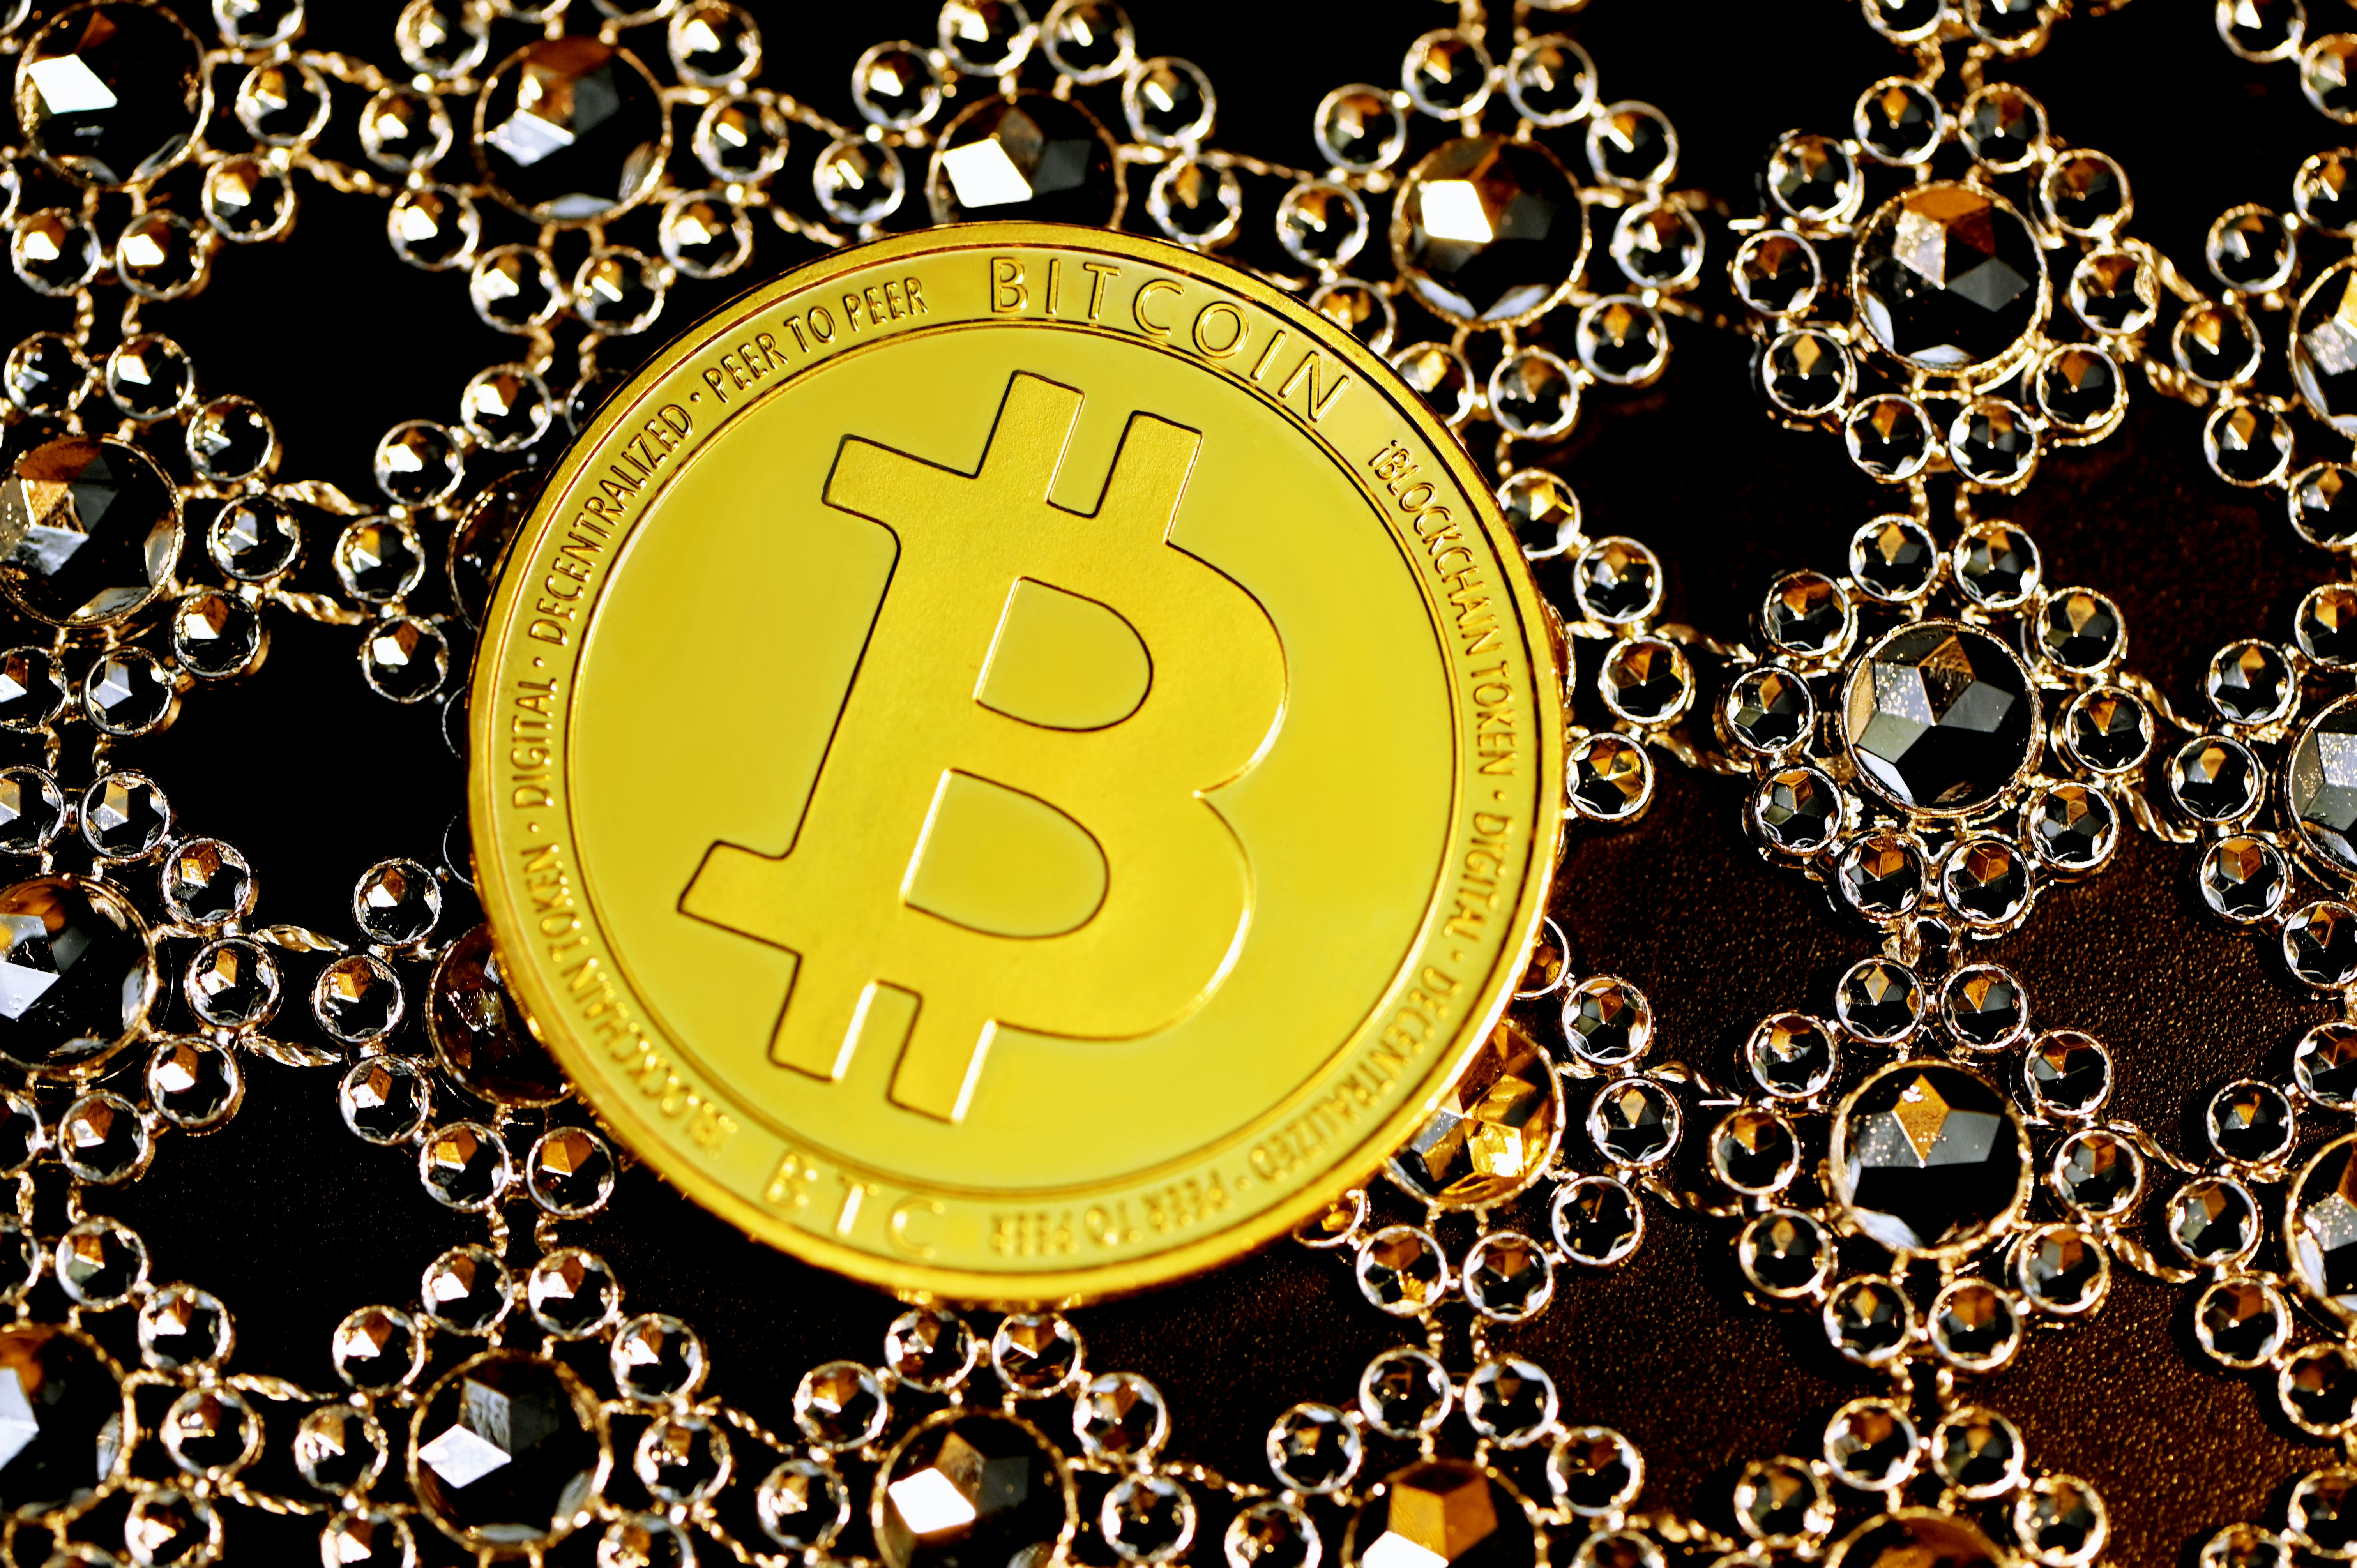 A Bitcoin on top of the jewelry